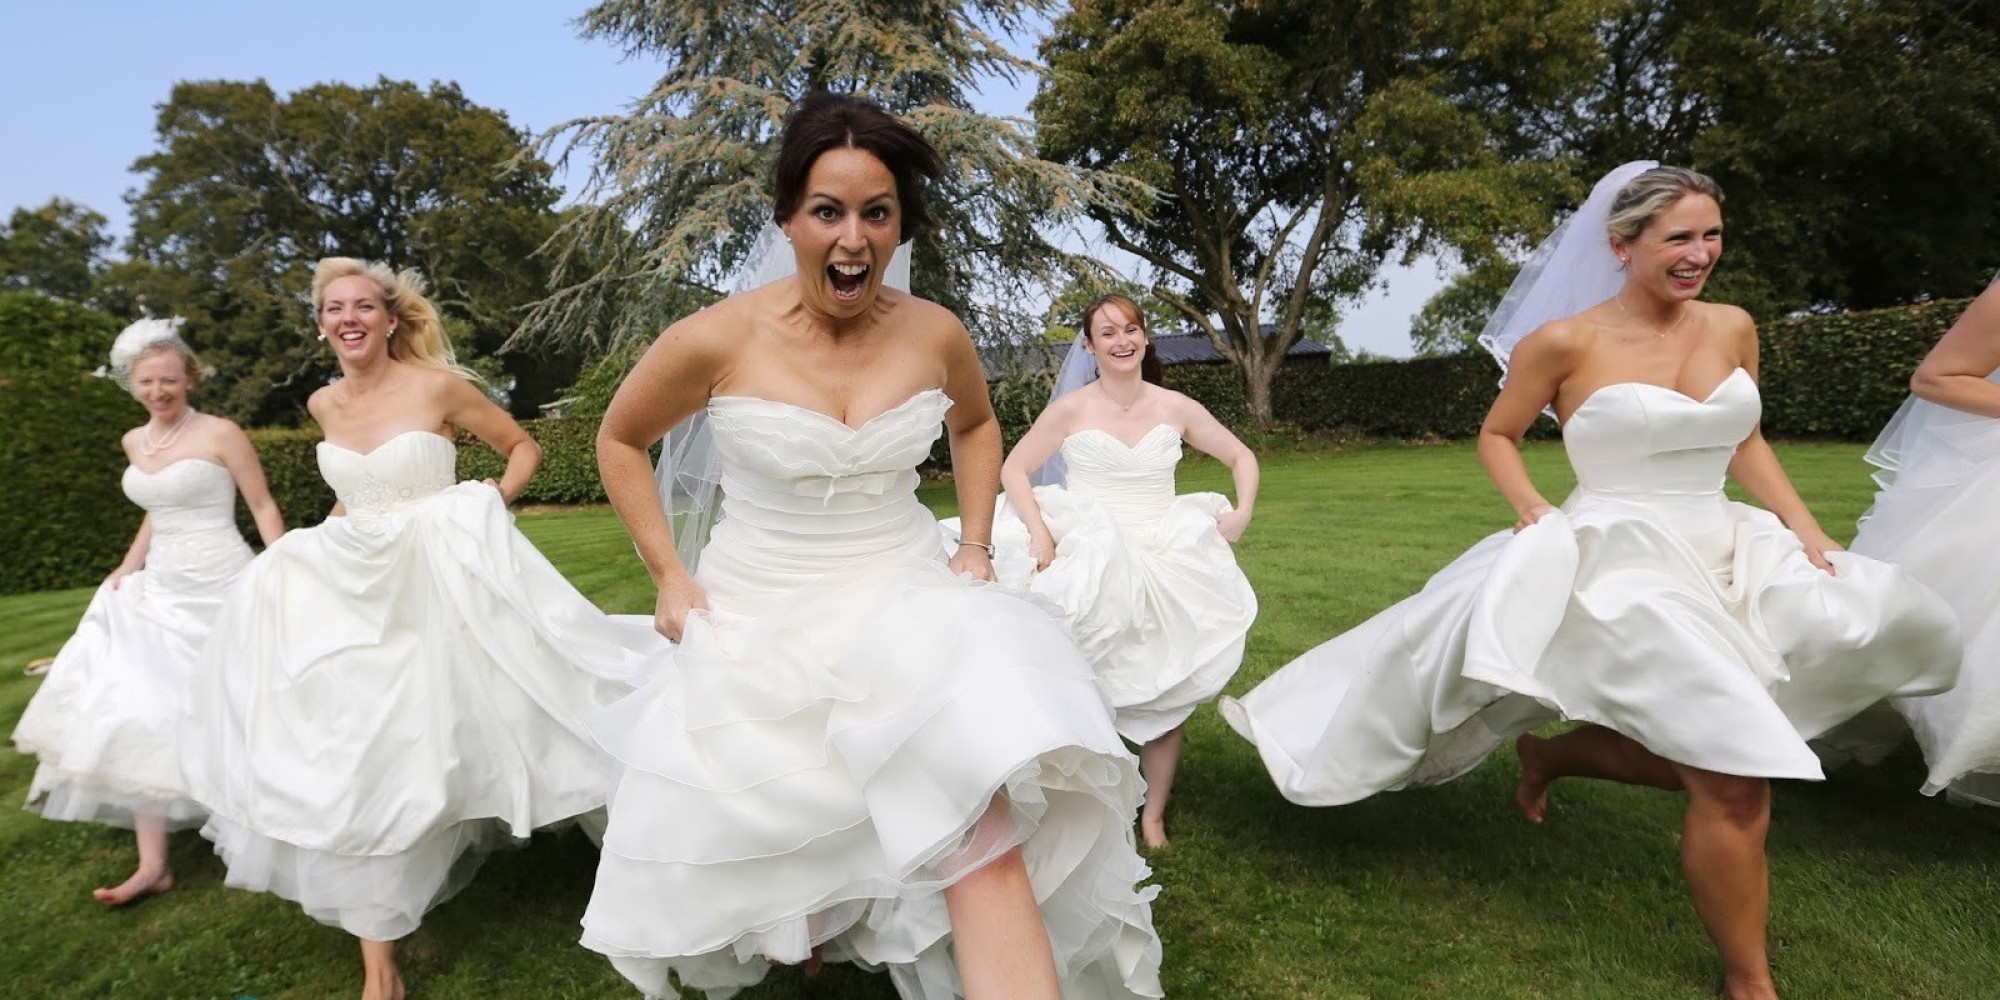 Childhood Best Friends Back In Their Wedding Dresses | HuffPost